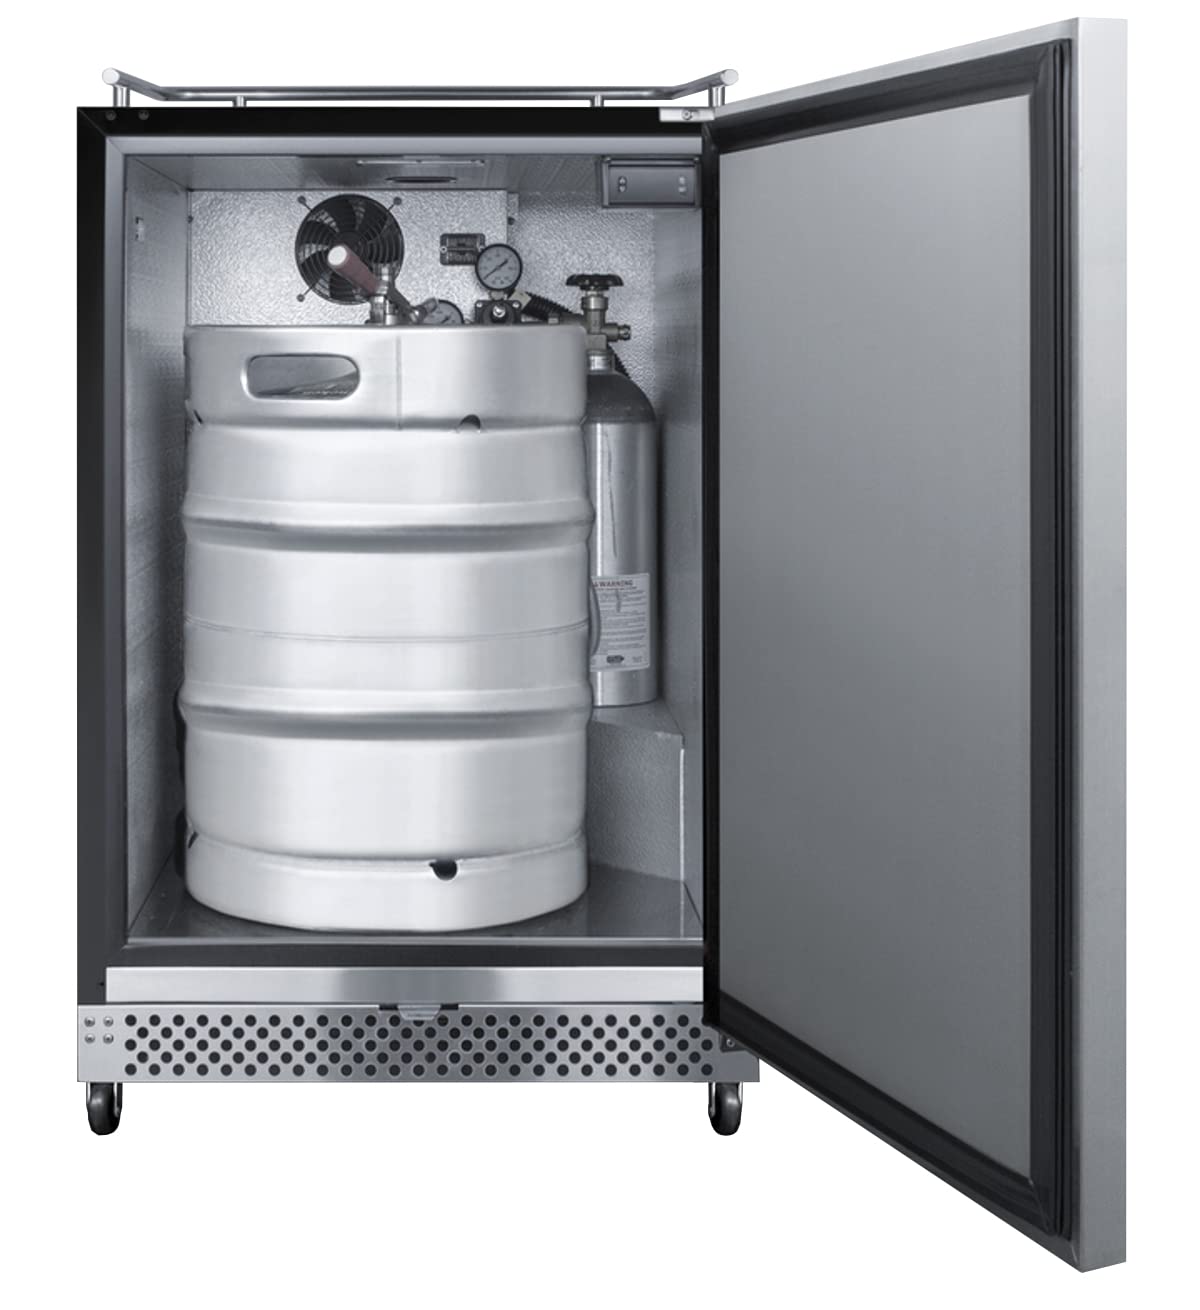 Summit Appliance SBC696OSNK 24' Wide Built-In Outdoor Kegerator, Weatherproof, Full-sized Beer Dispenser, 6.04 cu.ft Capacity, Digital Thermostat, Automatic Defrost, LED Lighting, Self-closing Door